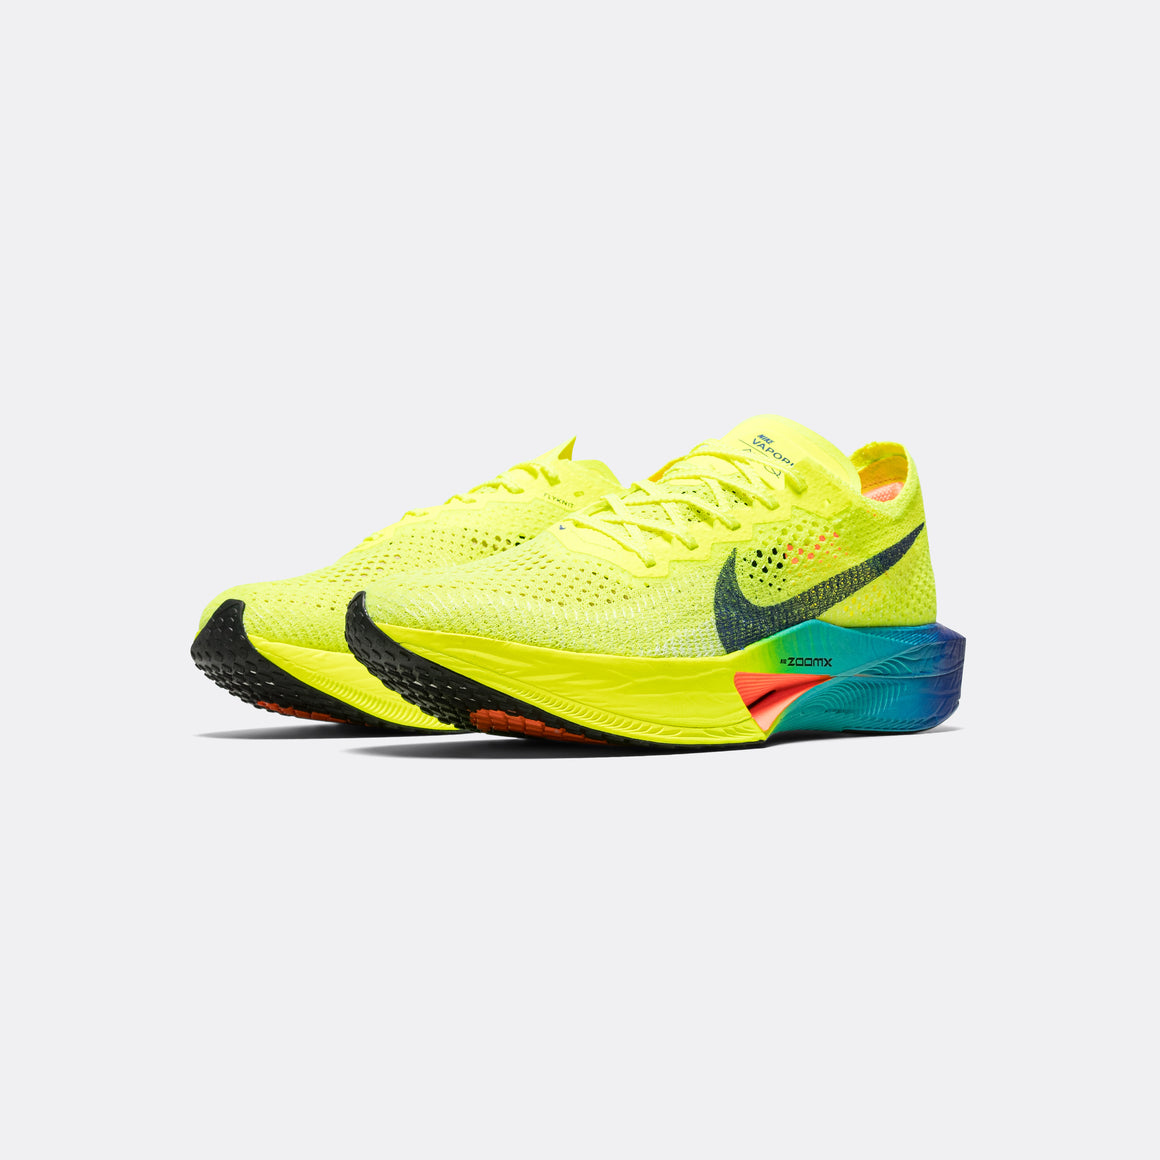 Nike - Womens ZoomX Vaporfly Next% 3 - Volt/Black-Scream Green - Up There Athletics